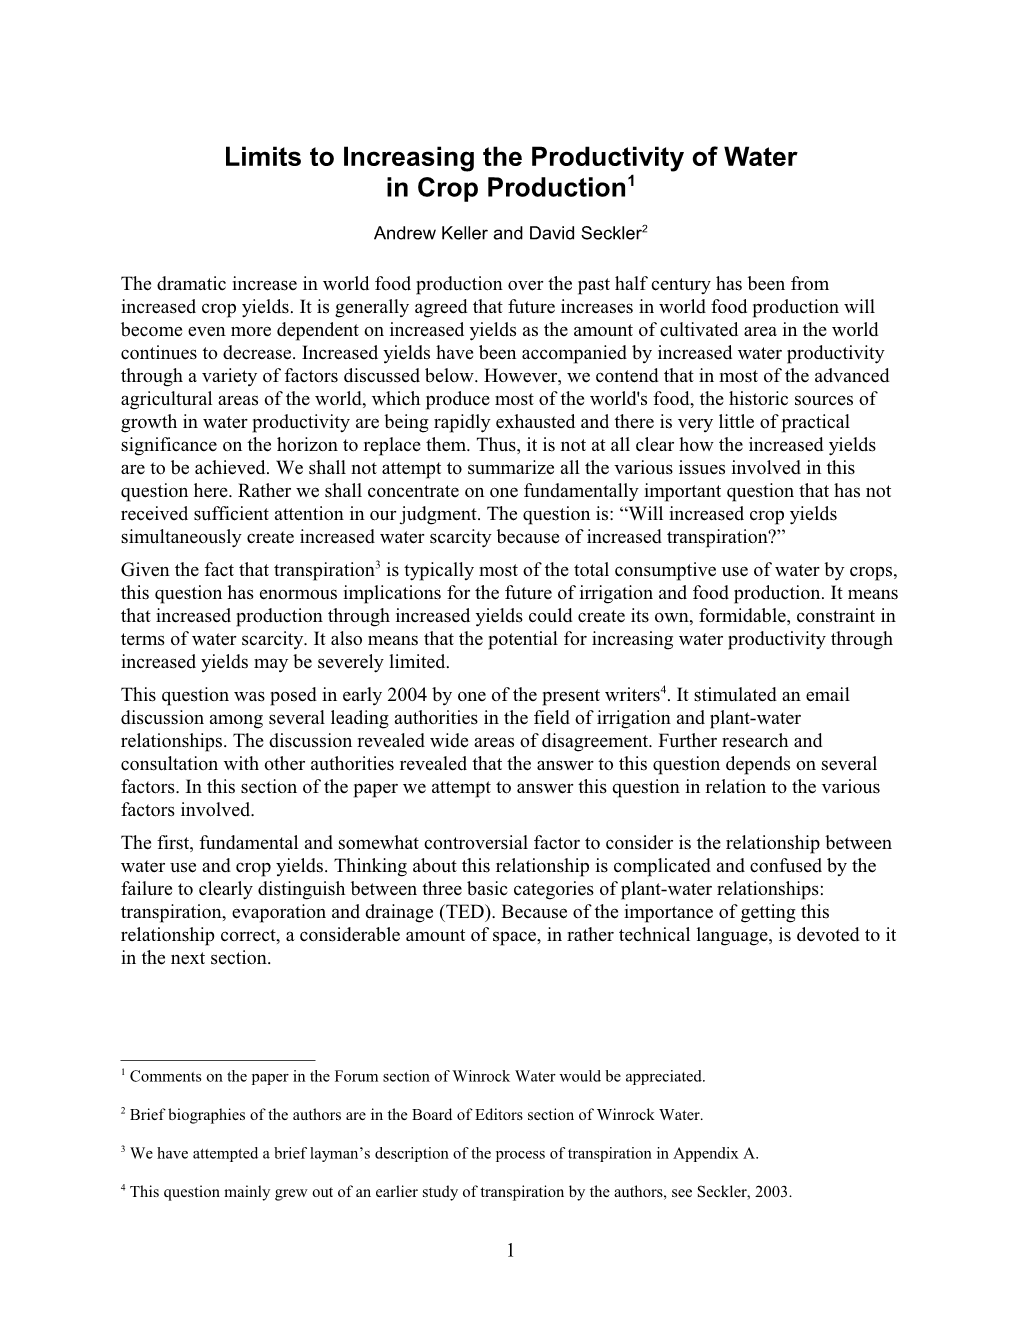 Limits to Increasing the Productivity of Water in Crop Production 1